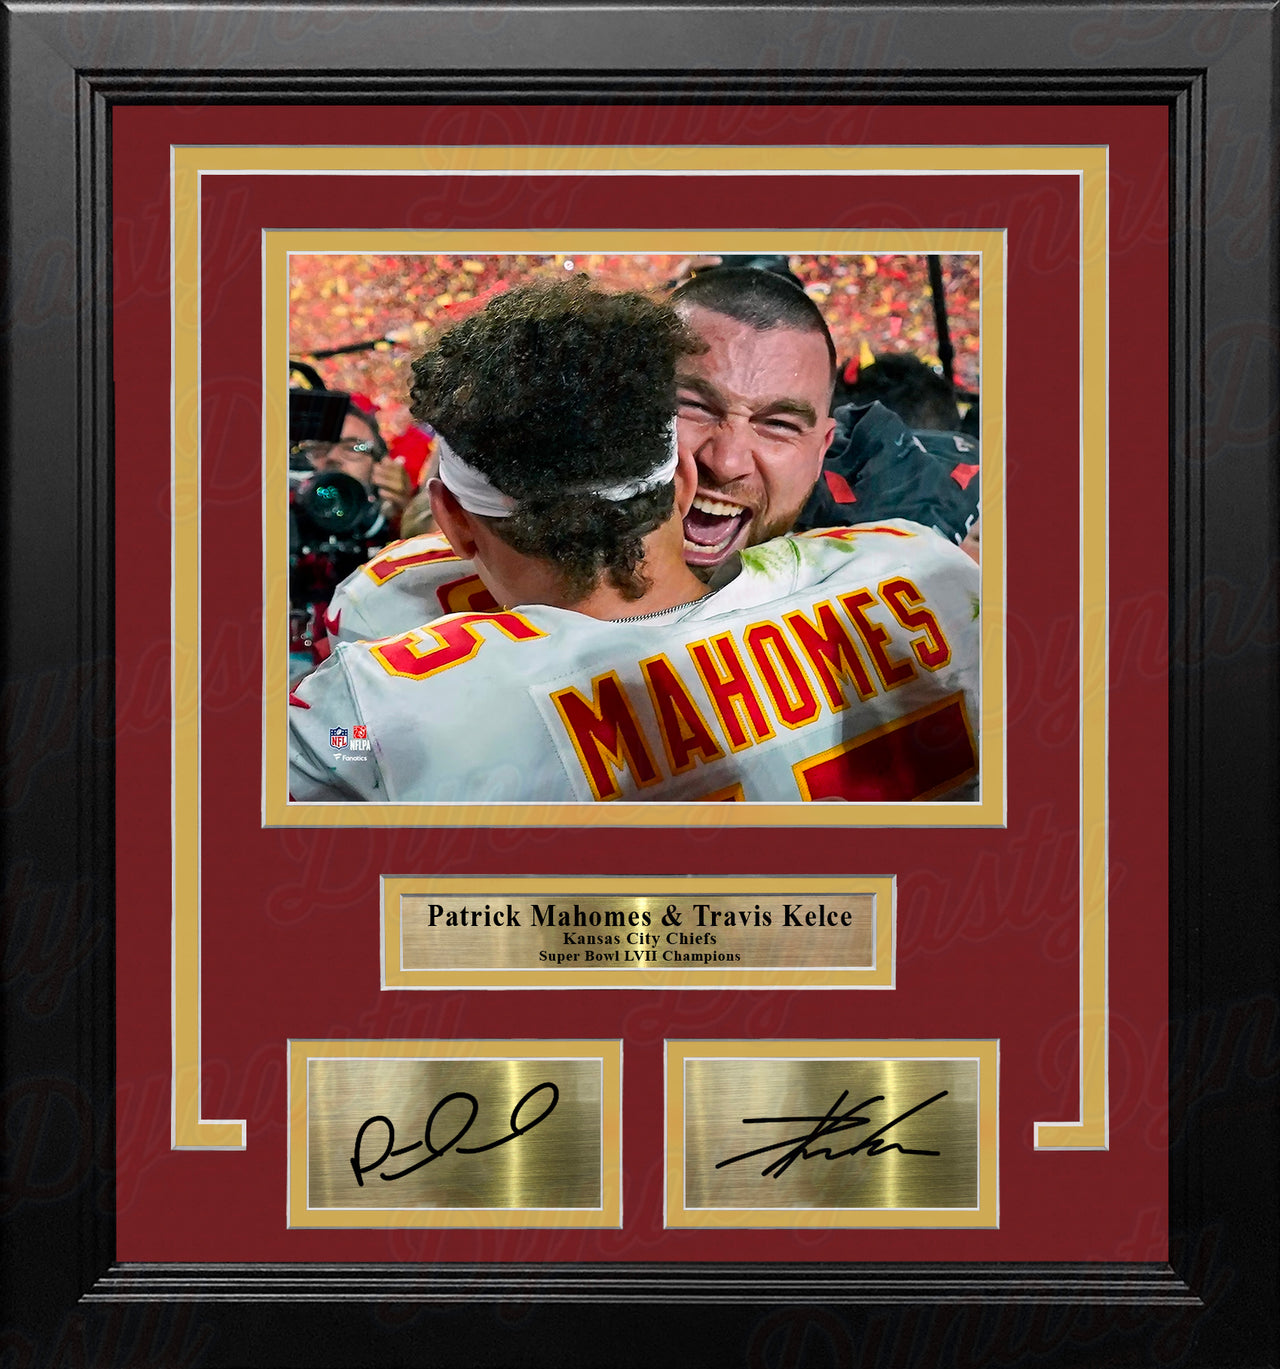 Patrick Mahomes & Travis Kelce Super Bowl LVII Champs Chiefs 8x10 Framed Photo with Laser Autographs - Dynasty Sports & Framing 